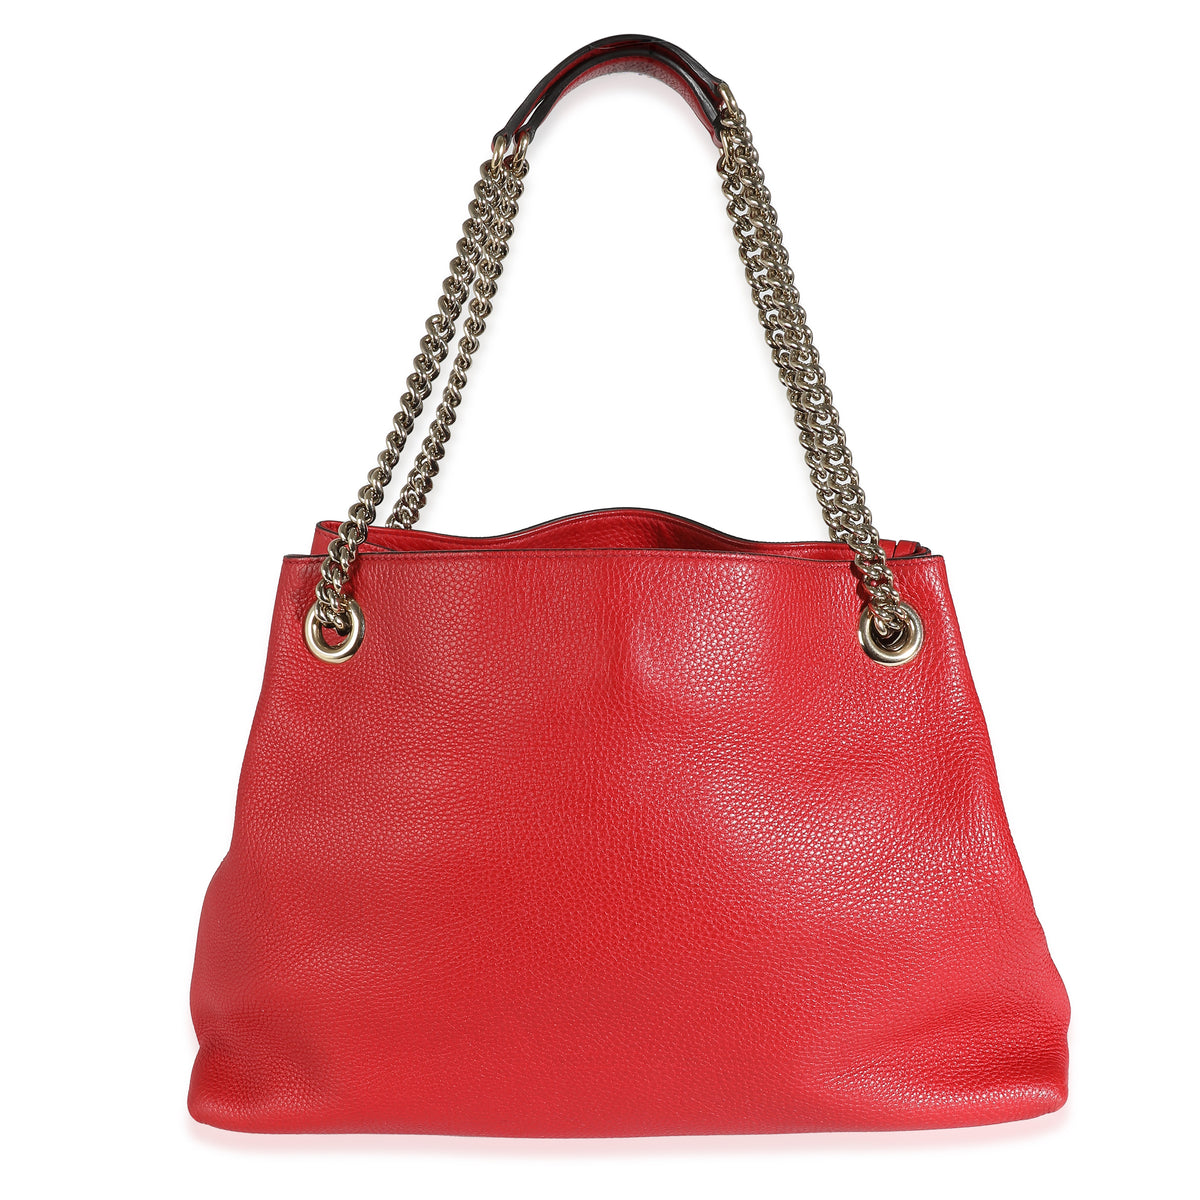 Gucci Red Pebbled Leather Soho Disco Chain Tote